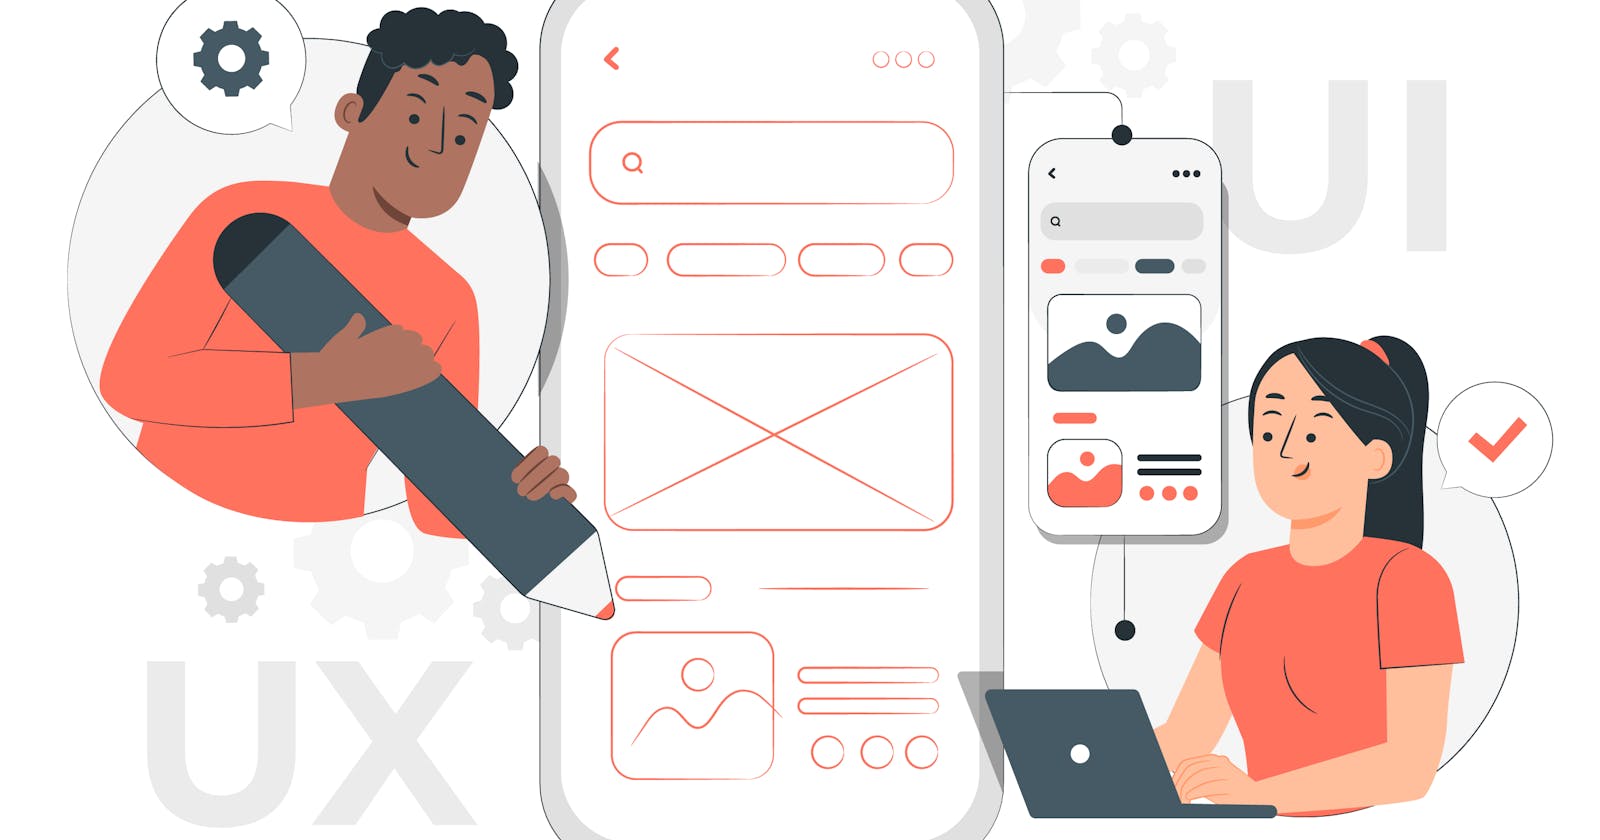 A Student's Guide to Essential UI/UX Principles